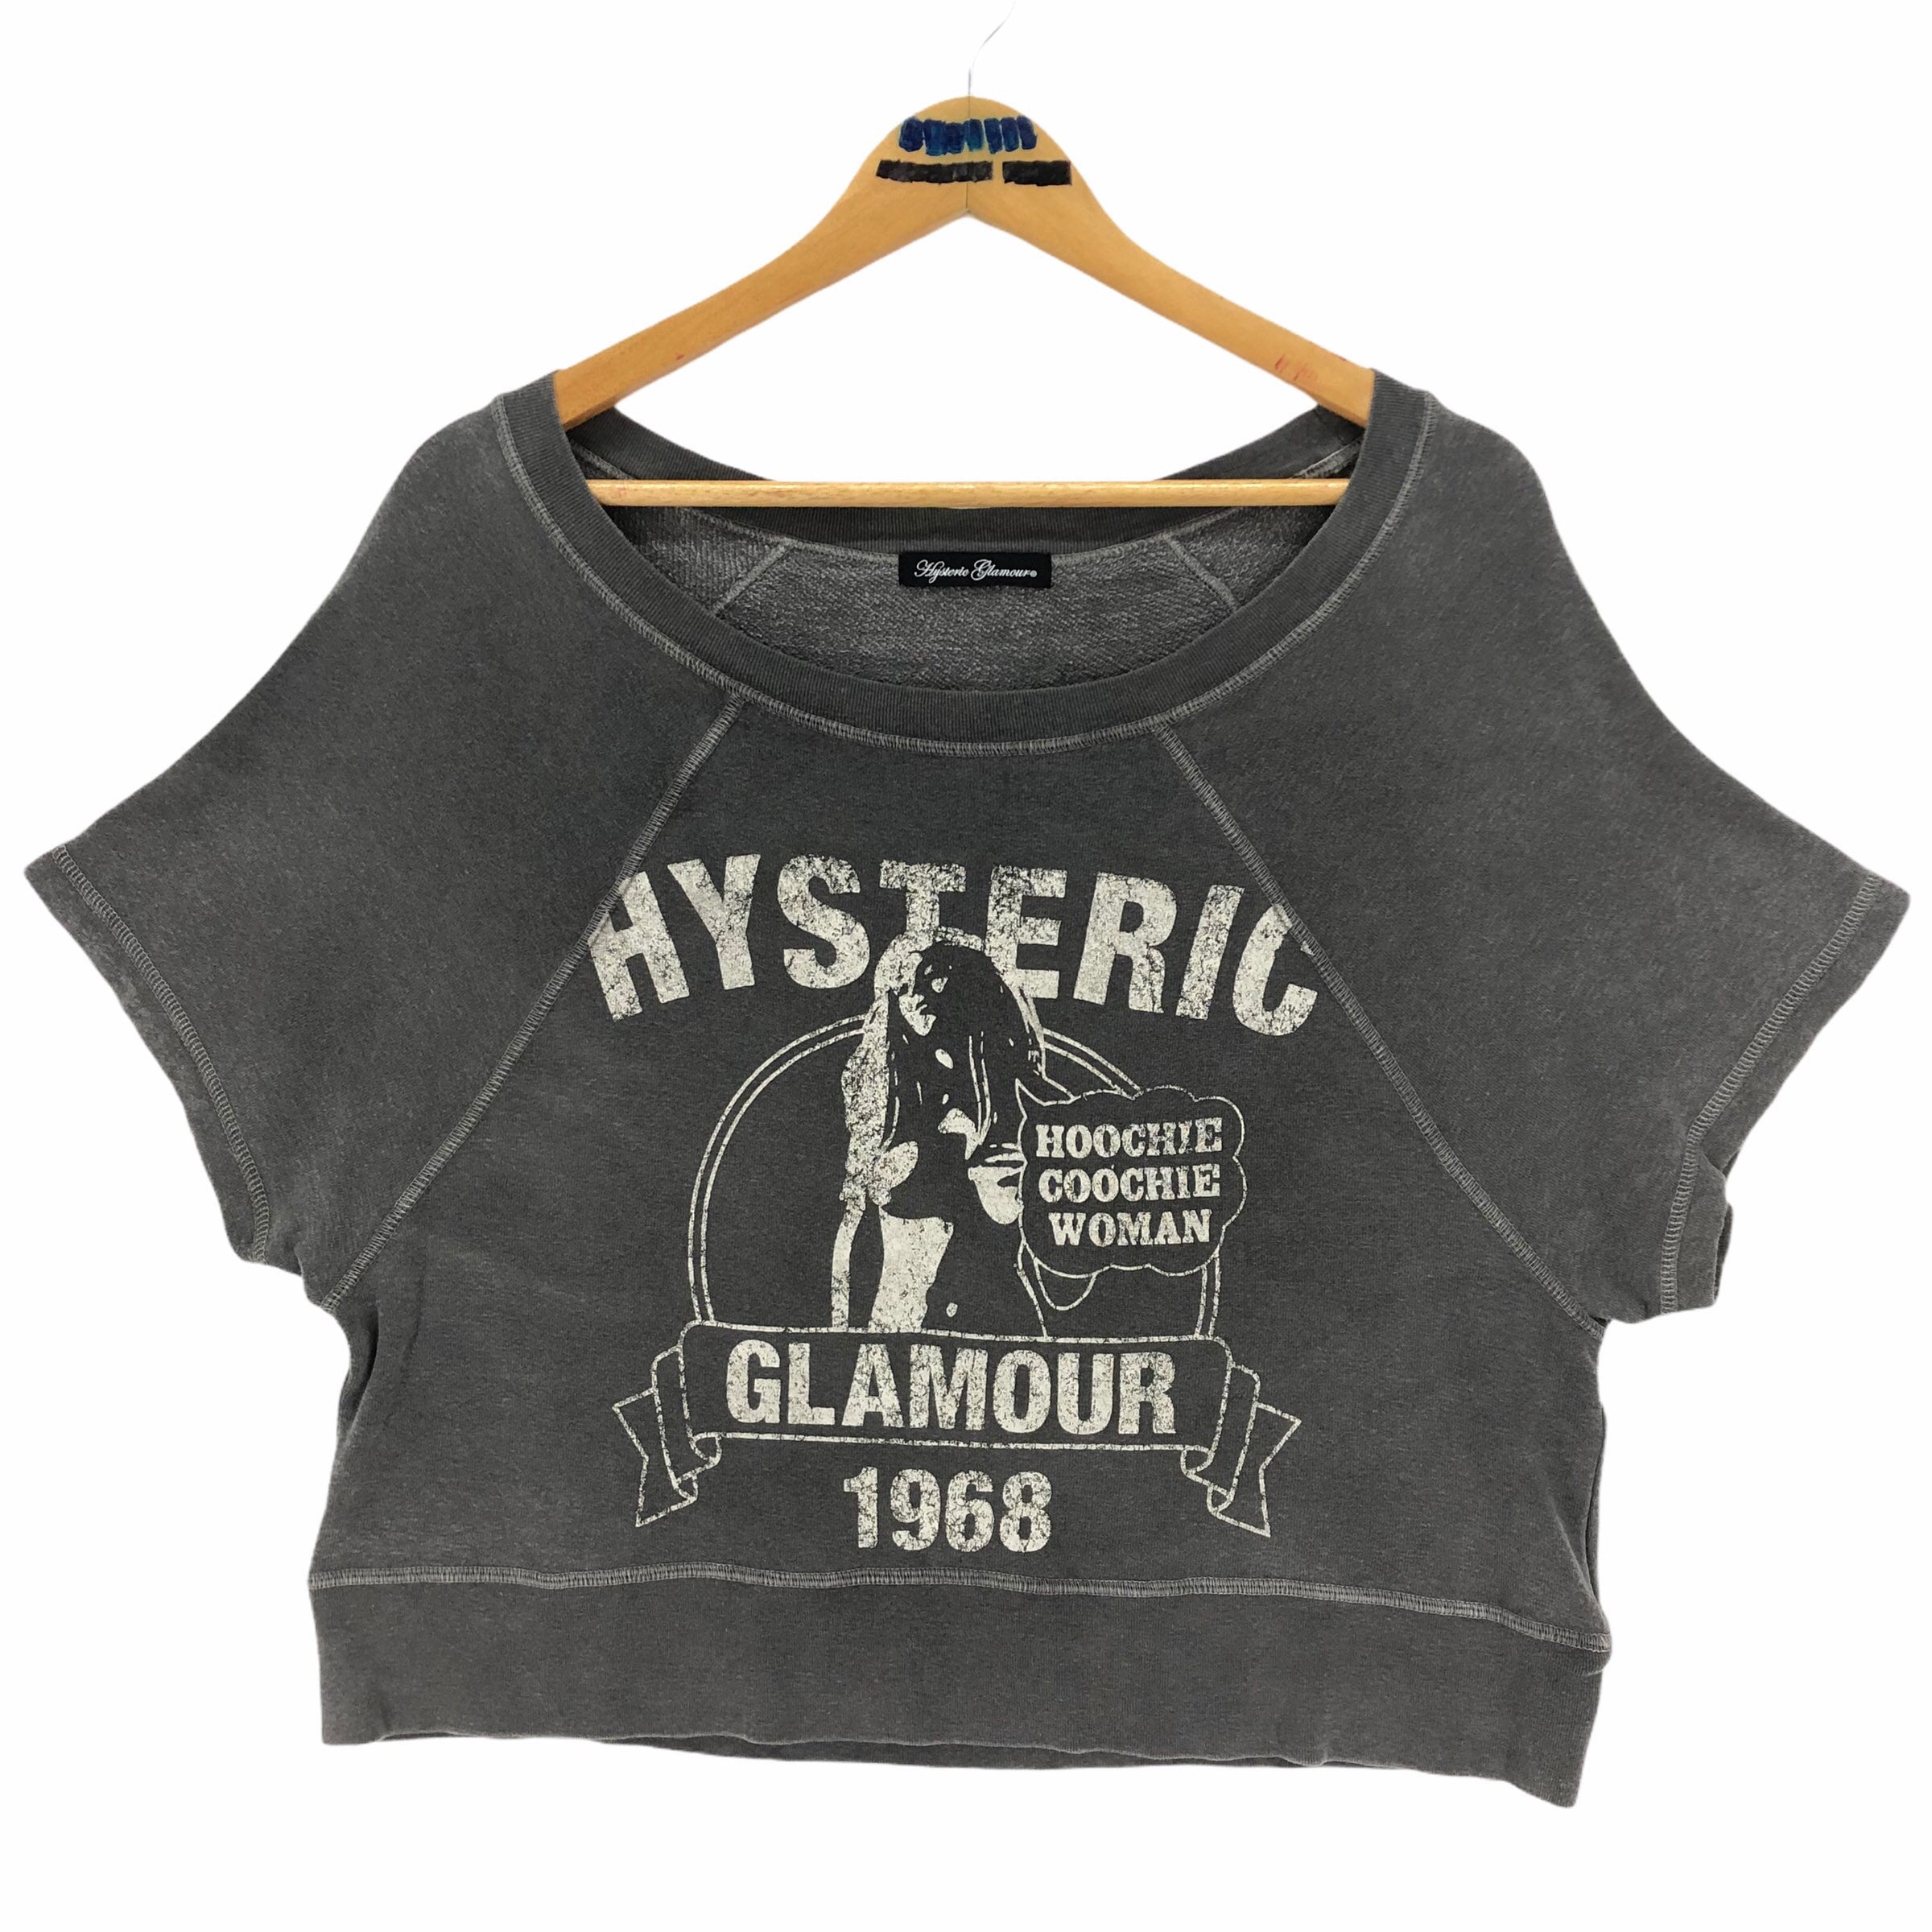 Vintage Hysteric Glamour Hoochie Coochie Woman Cropped Top - Etsy